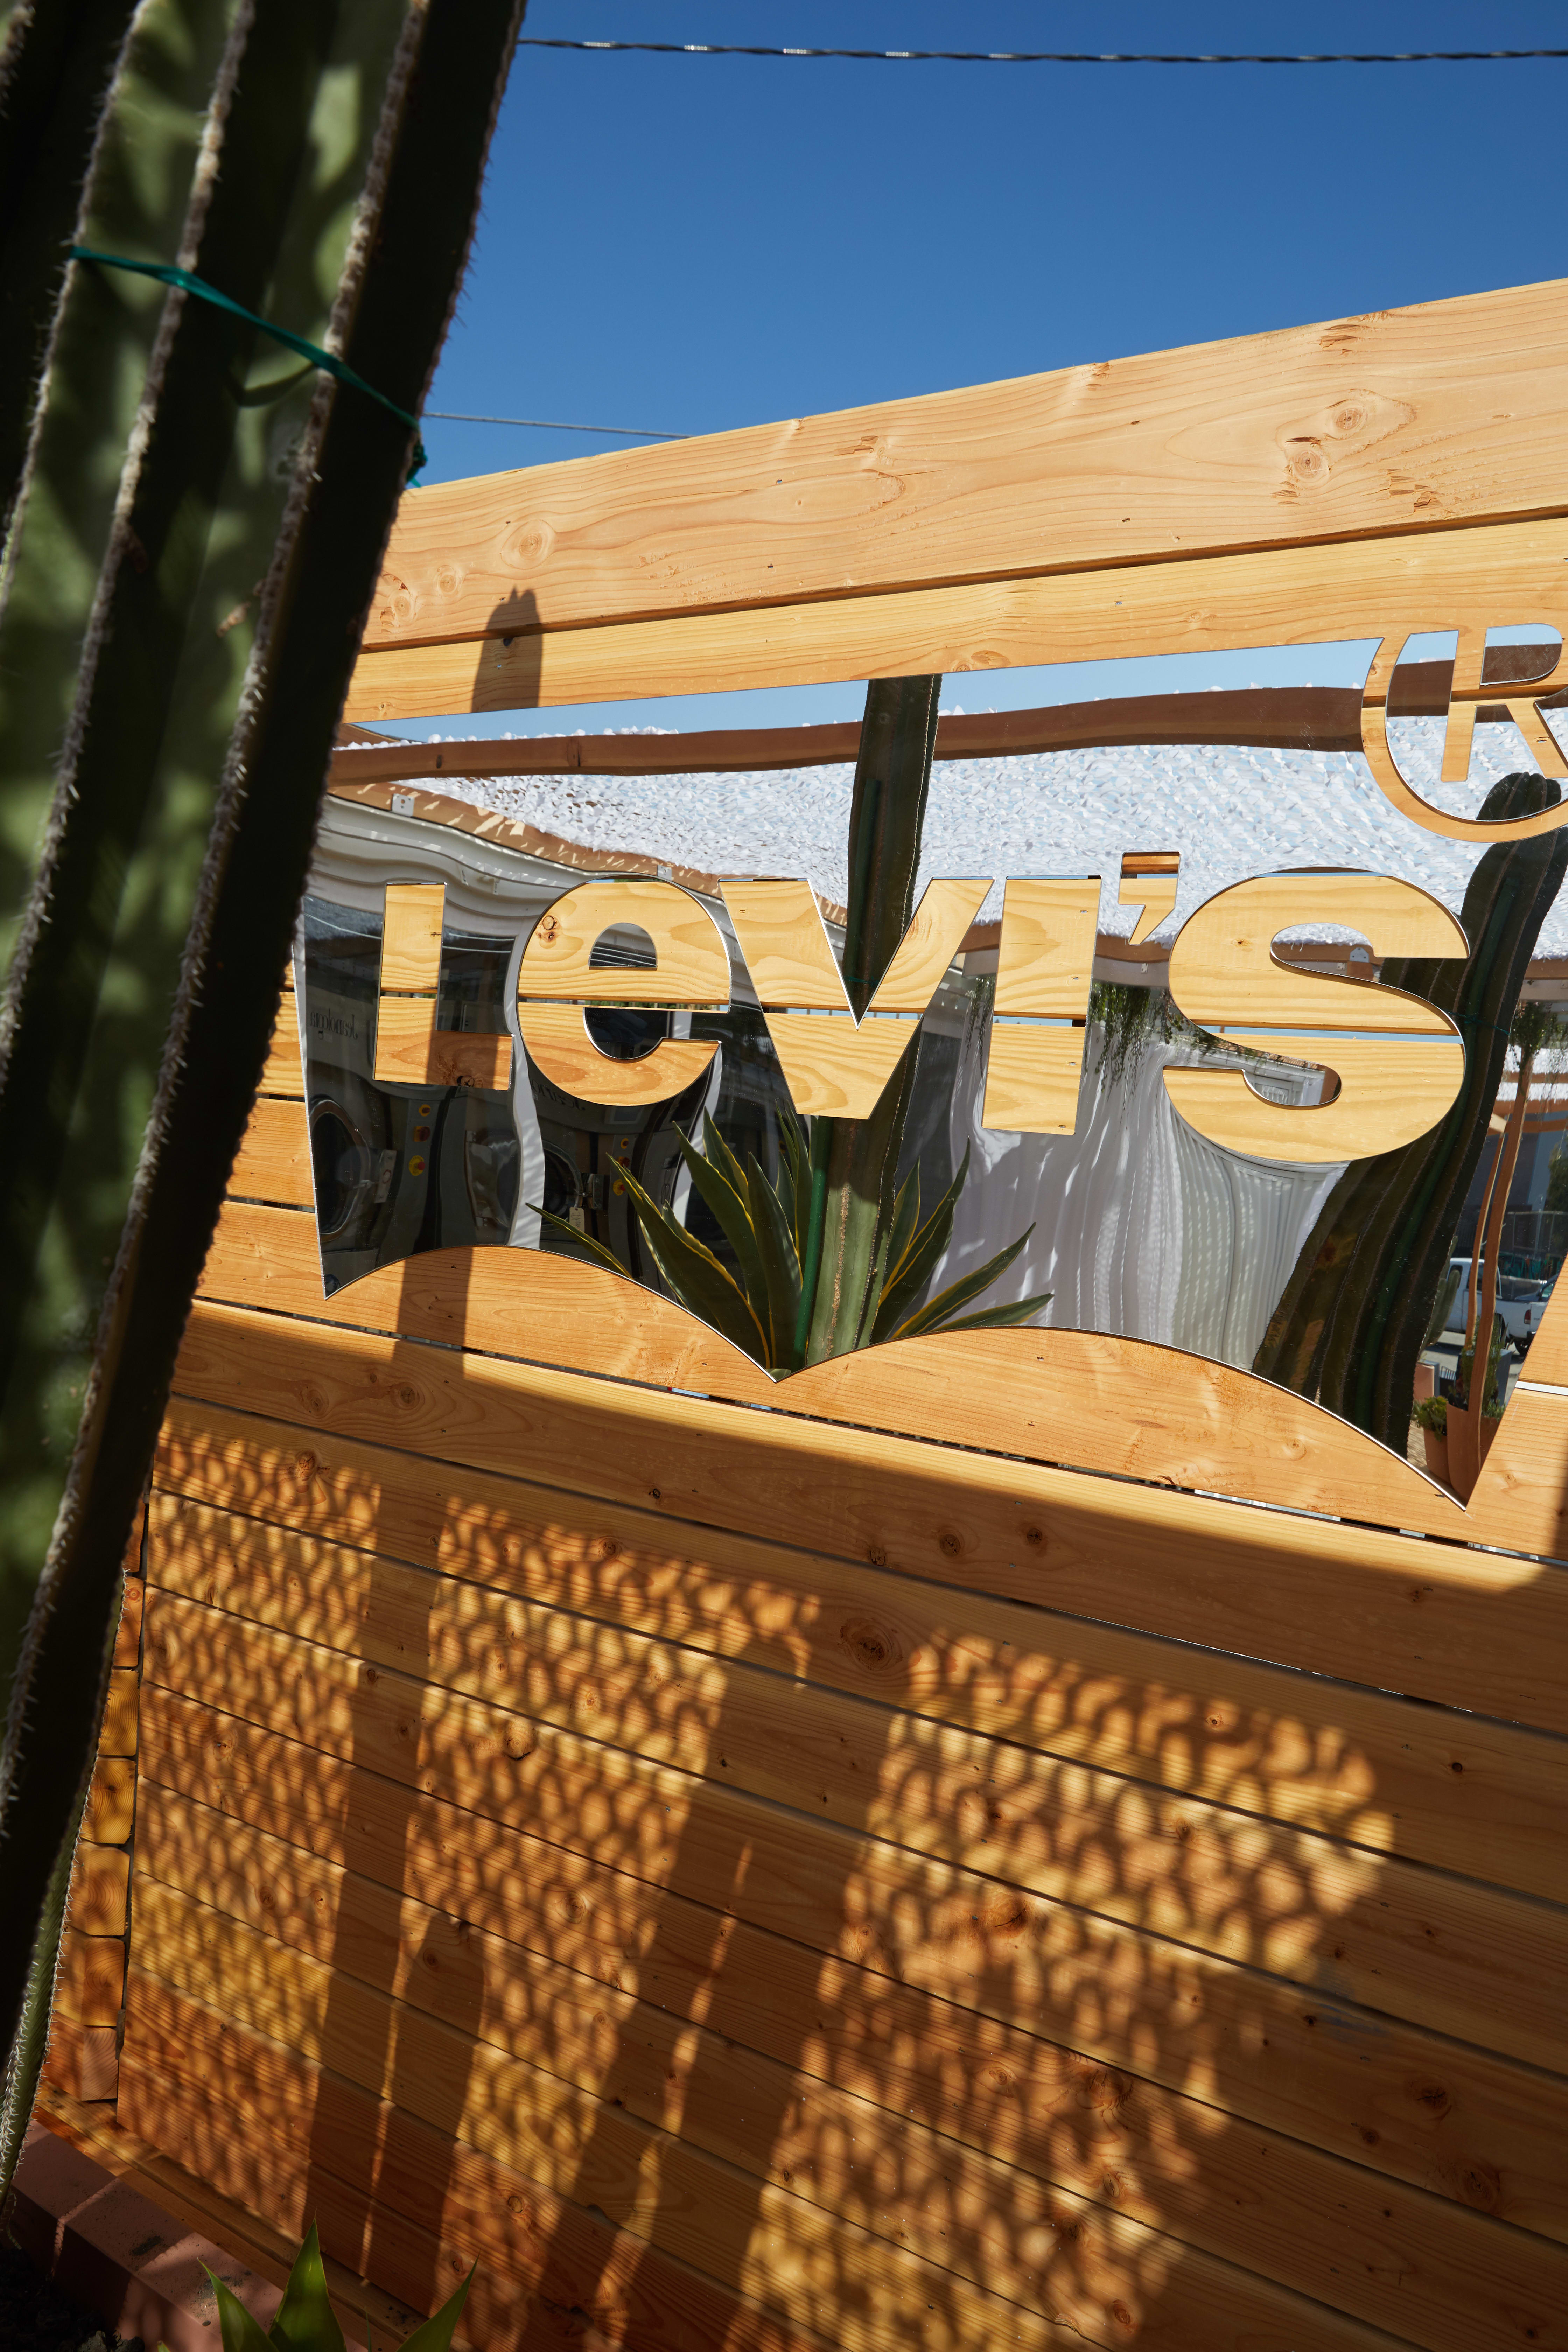 Introducing Levi’s(R) customization studio with Project F.L.X. Technology